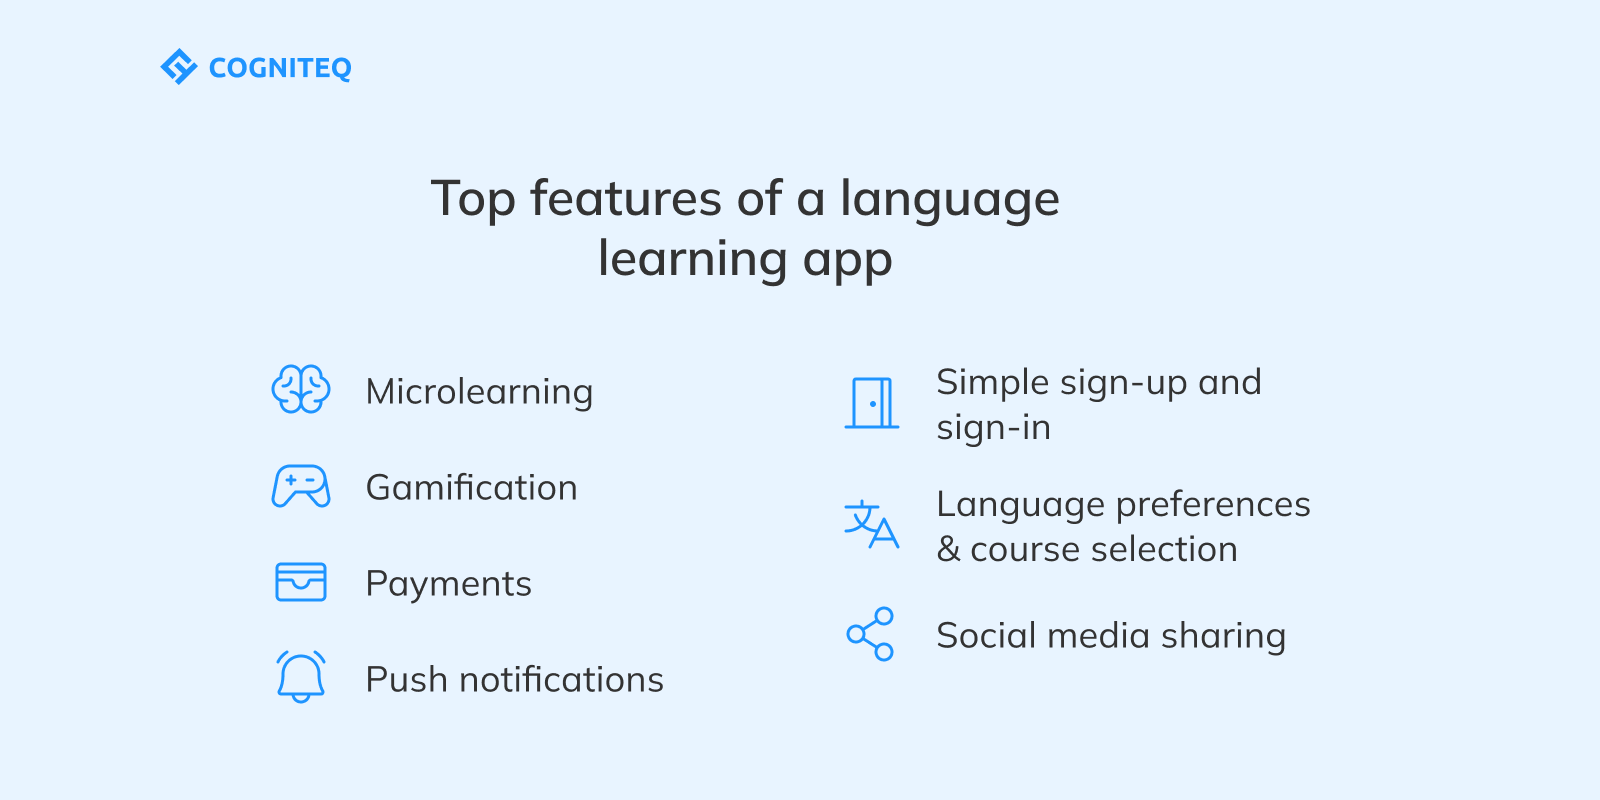 Top features of a language learning app